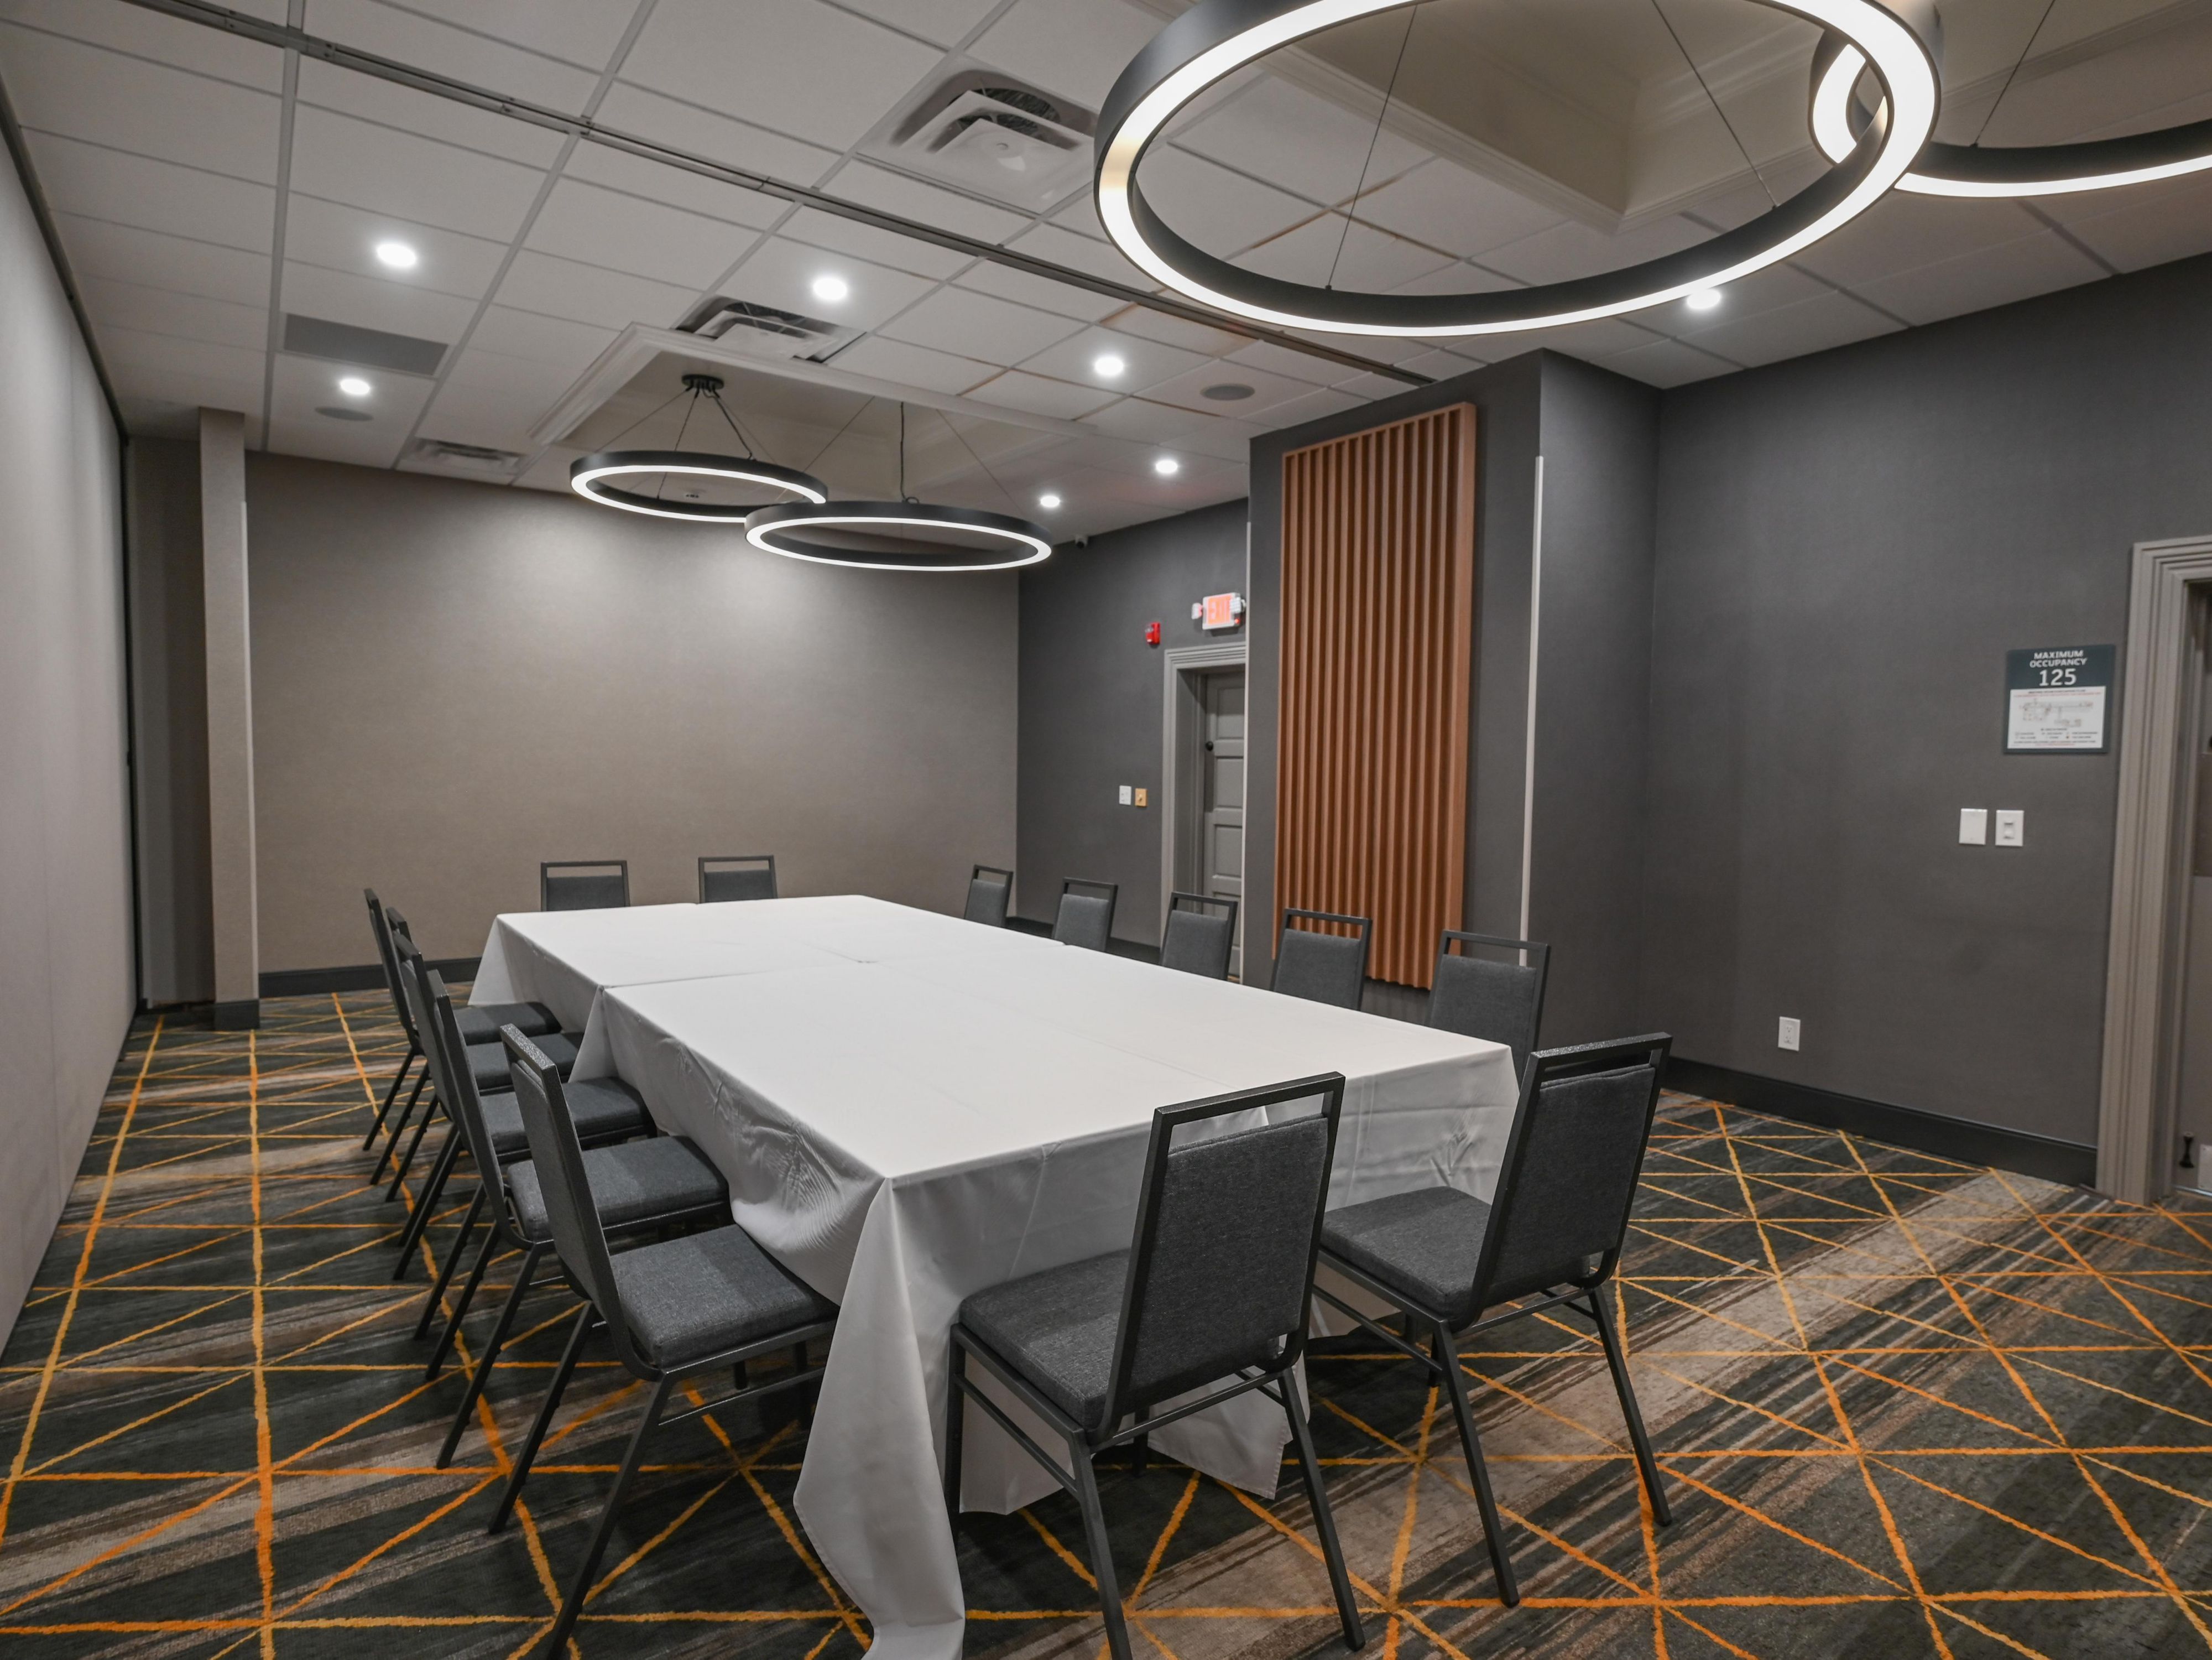 Host your Cleveland event at our hotel. With four meeting rooms and 3,000 sq ft of flexible space, we cater to gatherings of any size. Our dedicated event specialist and on-site catering by Alfredo's ensures seamless success. Whether it's a business meeting, bridal shower, rehearsal dinner, or reunion, our staff will bring your vision to life.